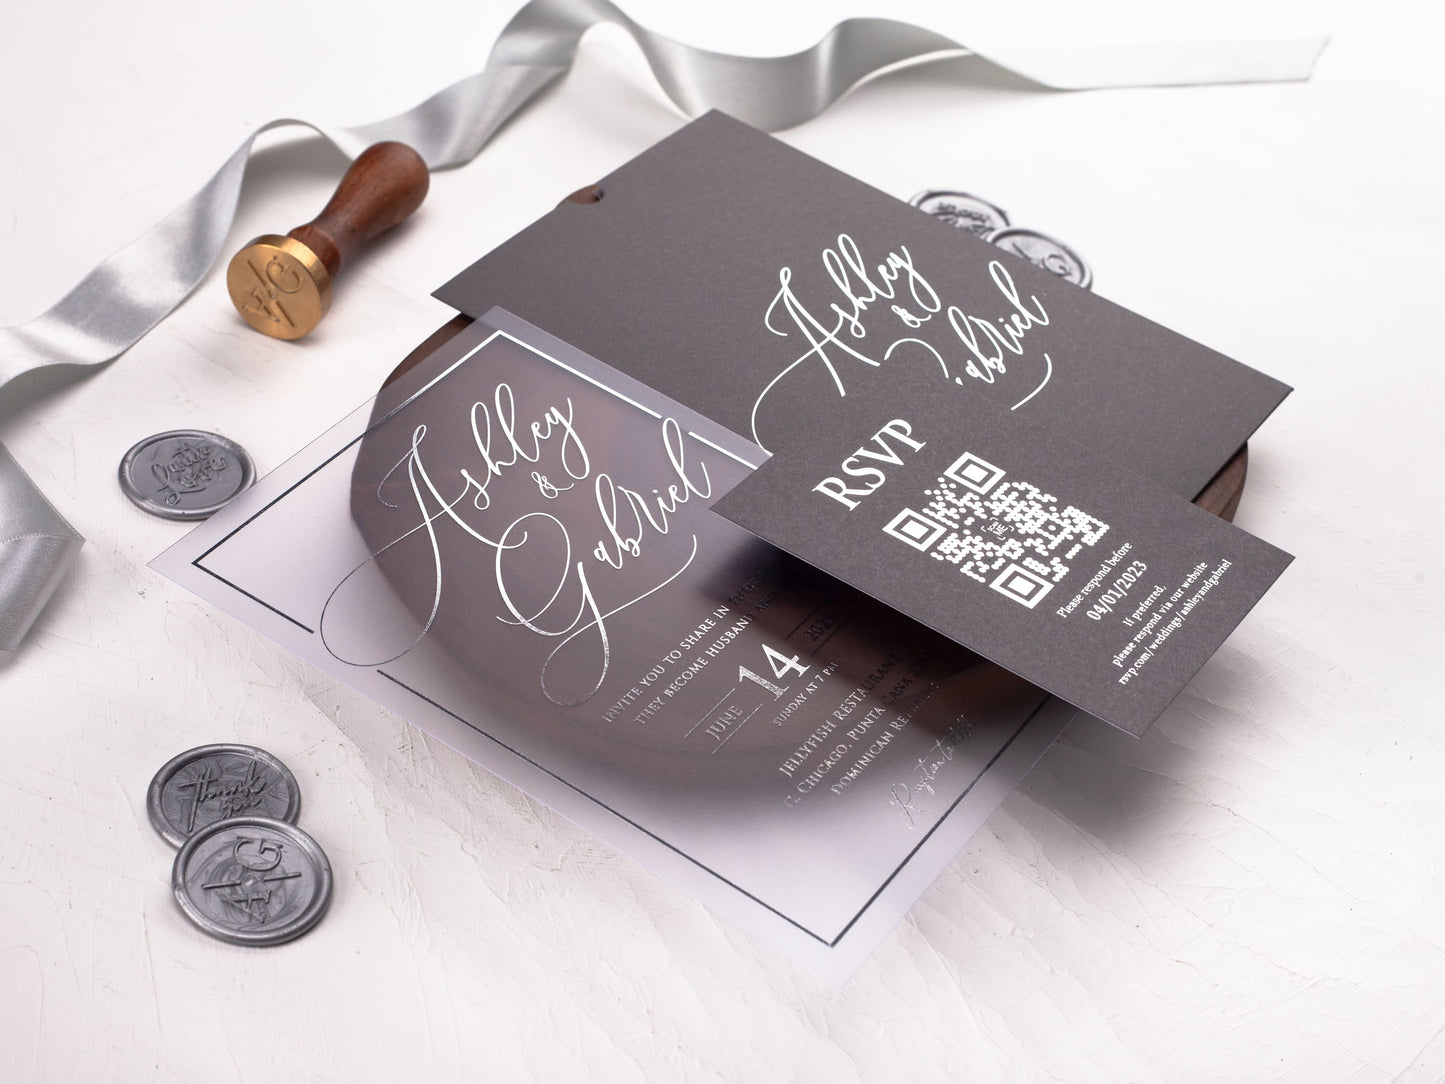 Acrylic Wedding Invitation with Silver Foil Print and Gray Envelope